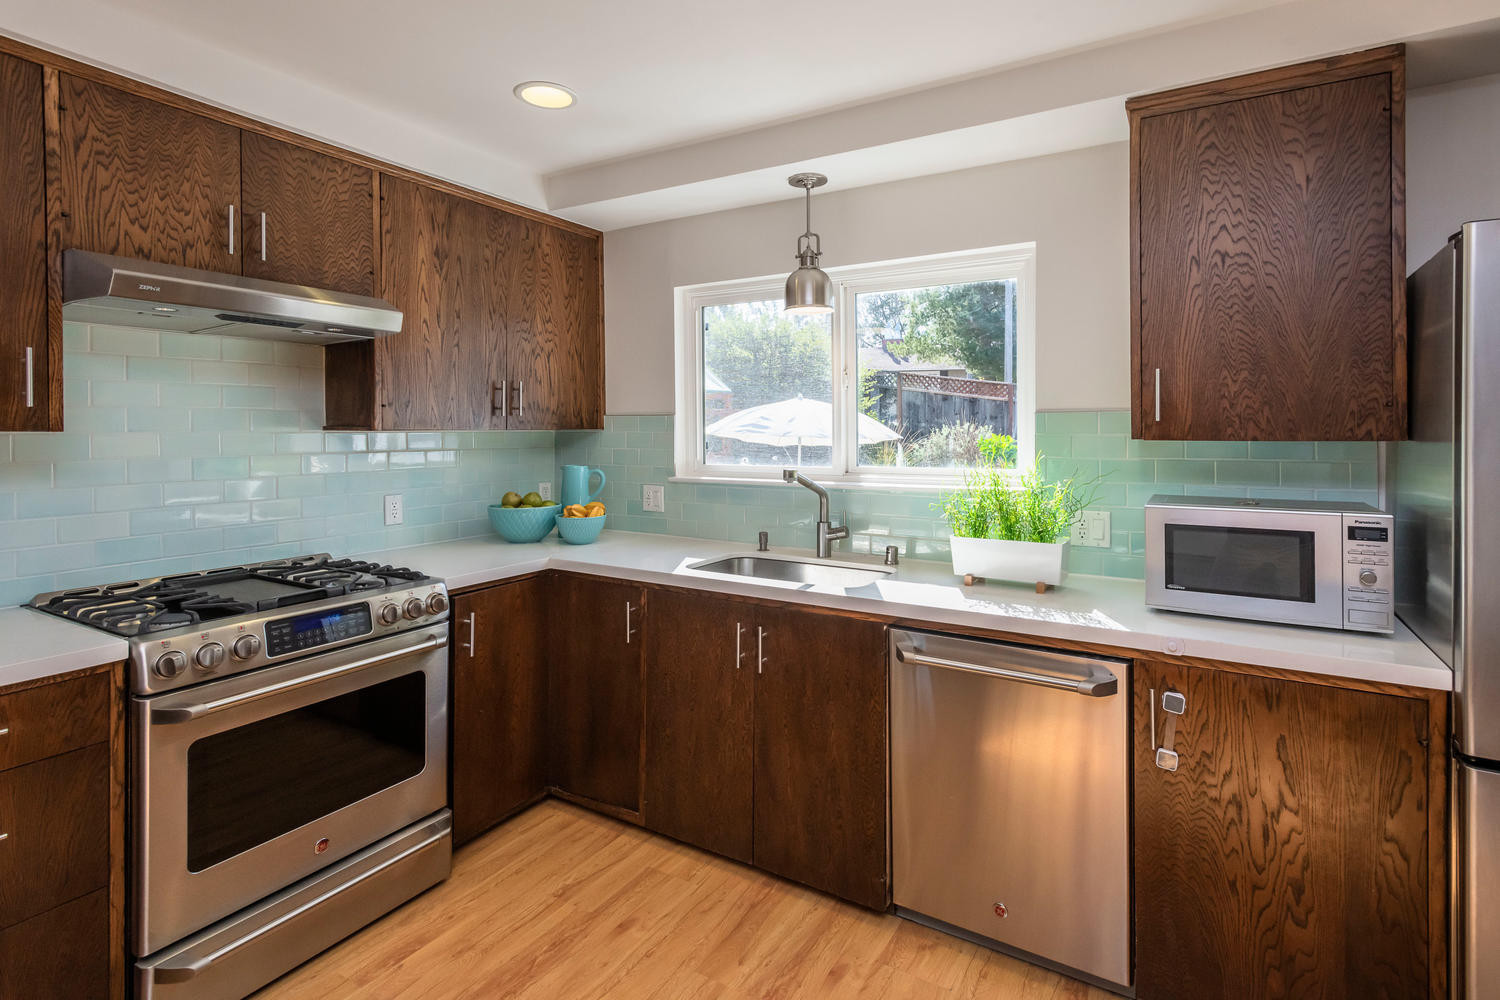 172 Lakeshore Drive Kitchen Base Cabinets in Baywood Park/Enchanted Hills Neighborhood in San Mateo.